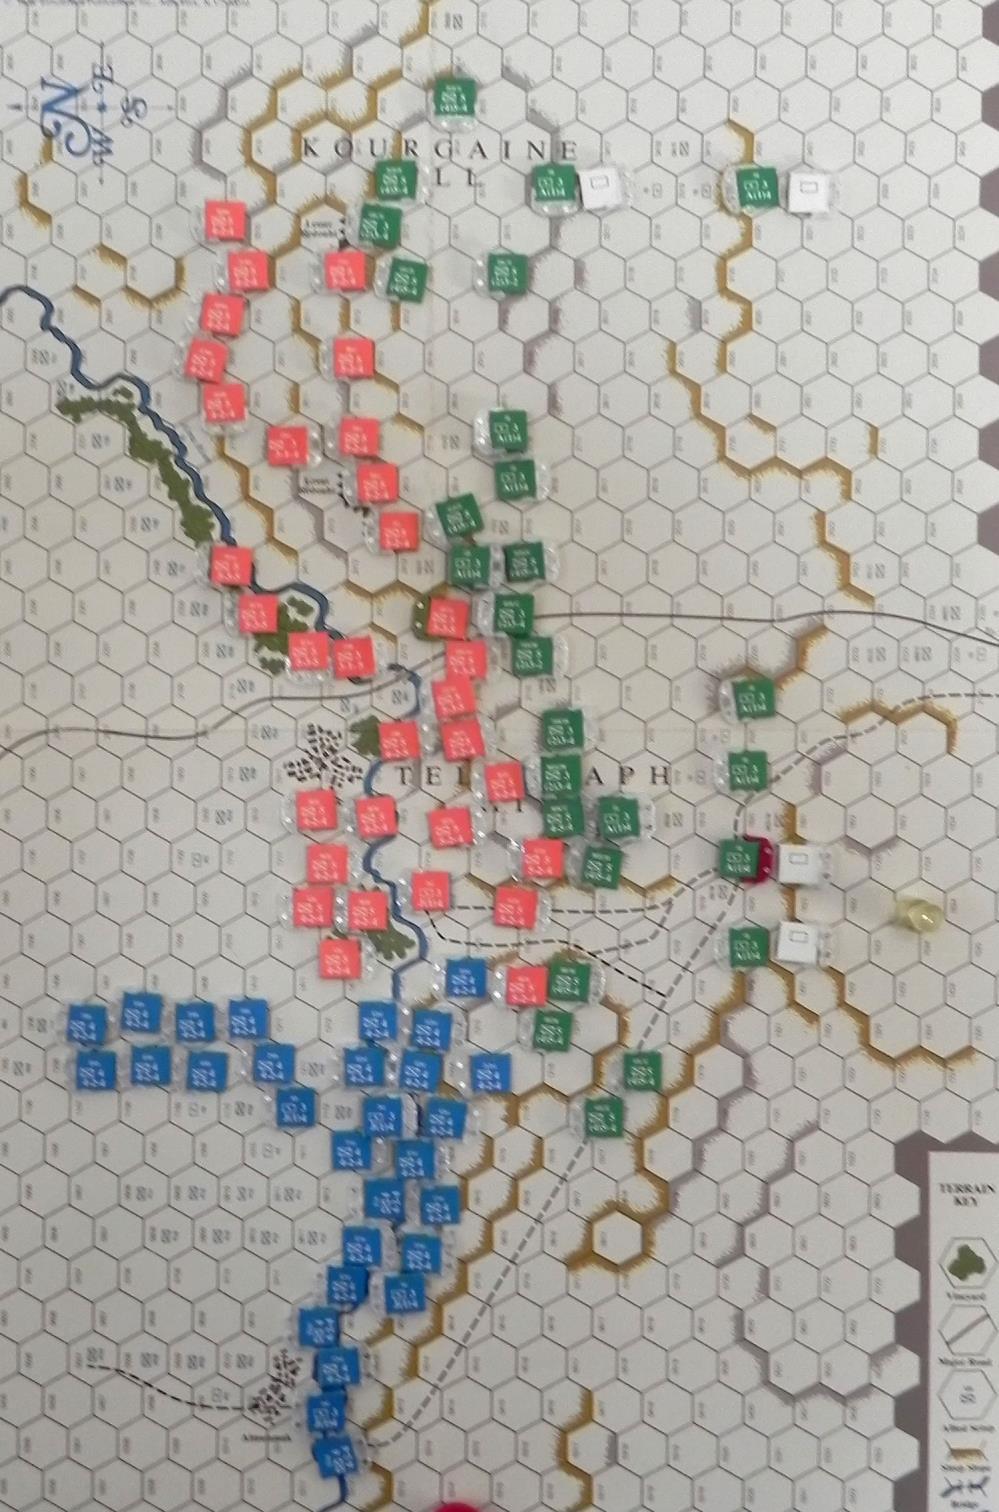 Turn 5. The blank counters are to help me remember which artillery units moved this turn. Turn 6 The Allies pursue the Russians all along the line.